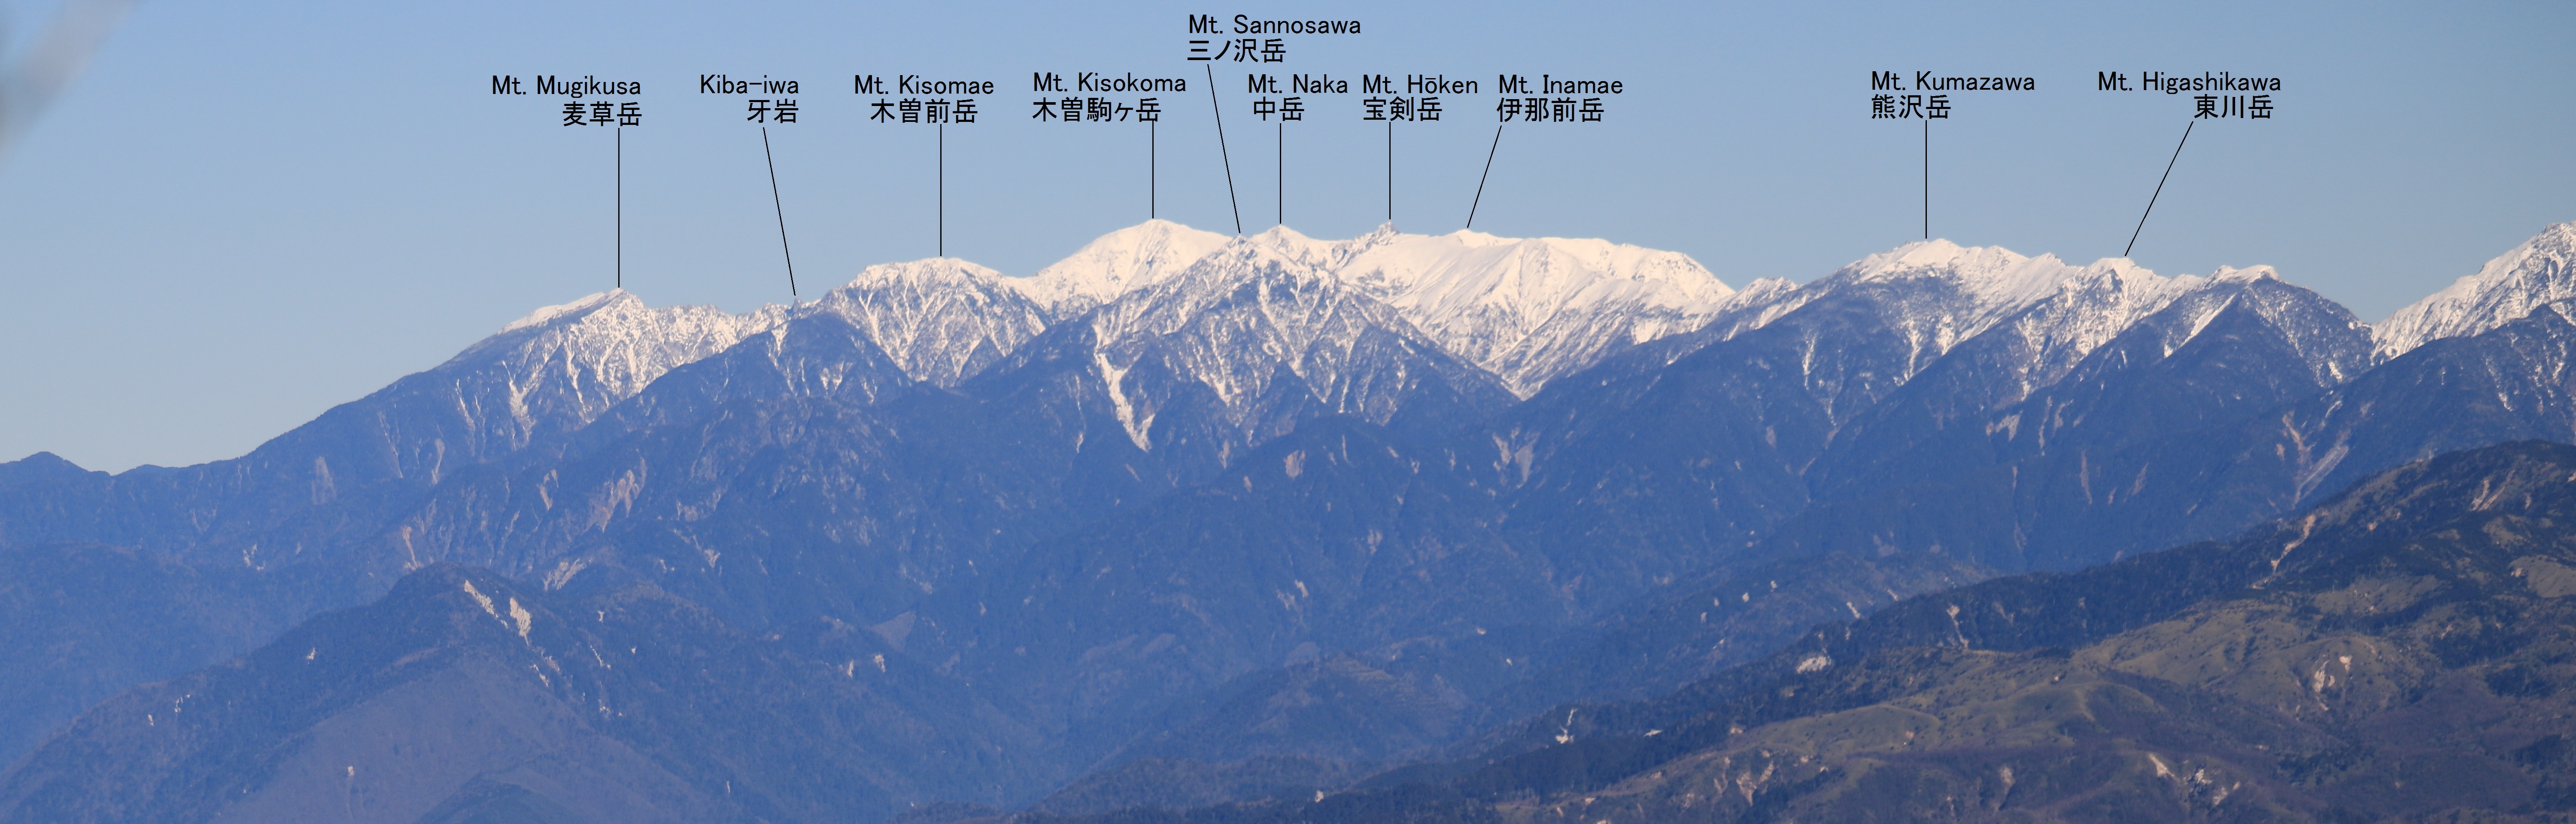 File Mount Kisokoma From Mount Ena 16 12 03 With Note Jpg Wikimedia Commons